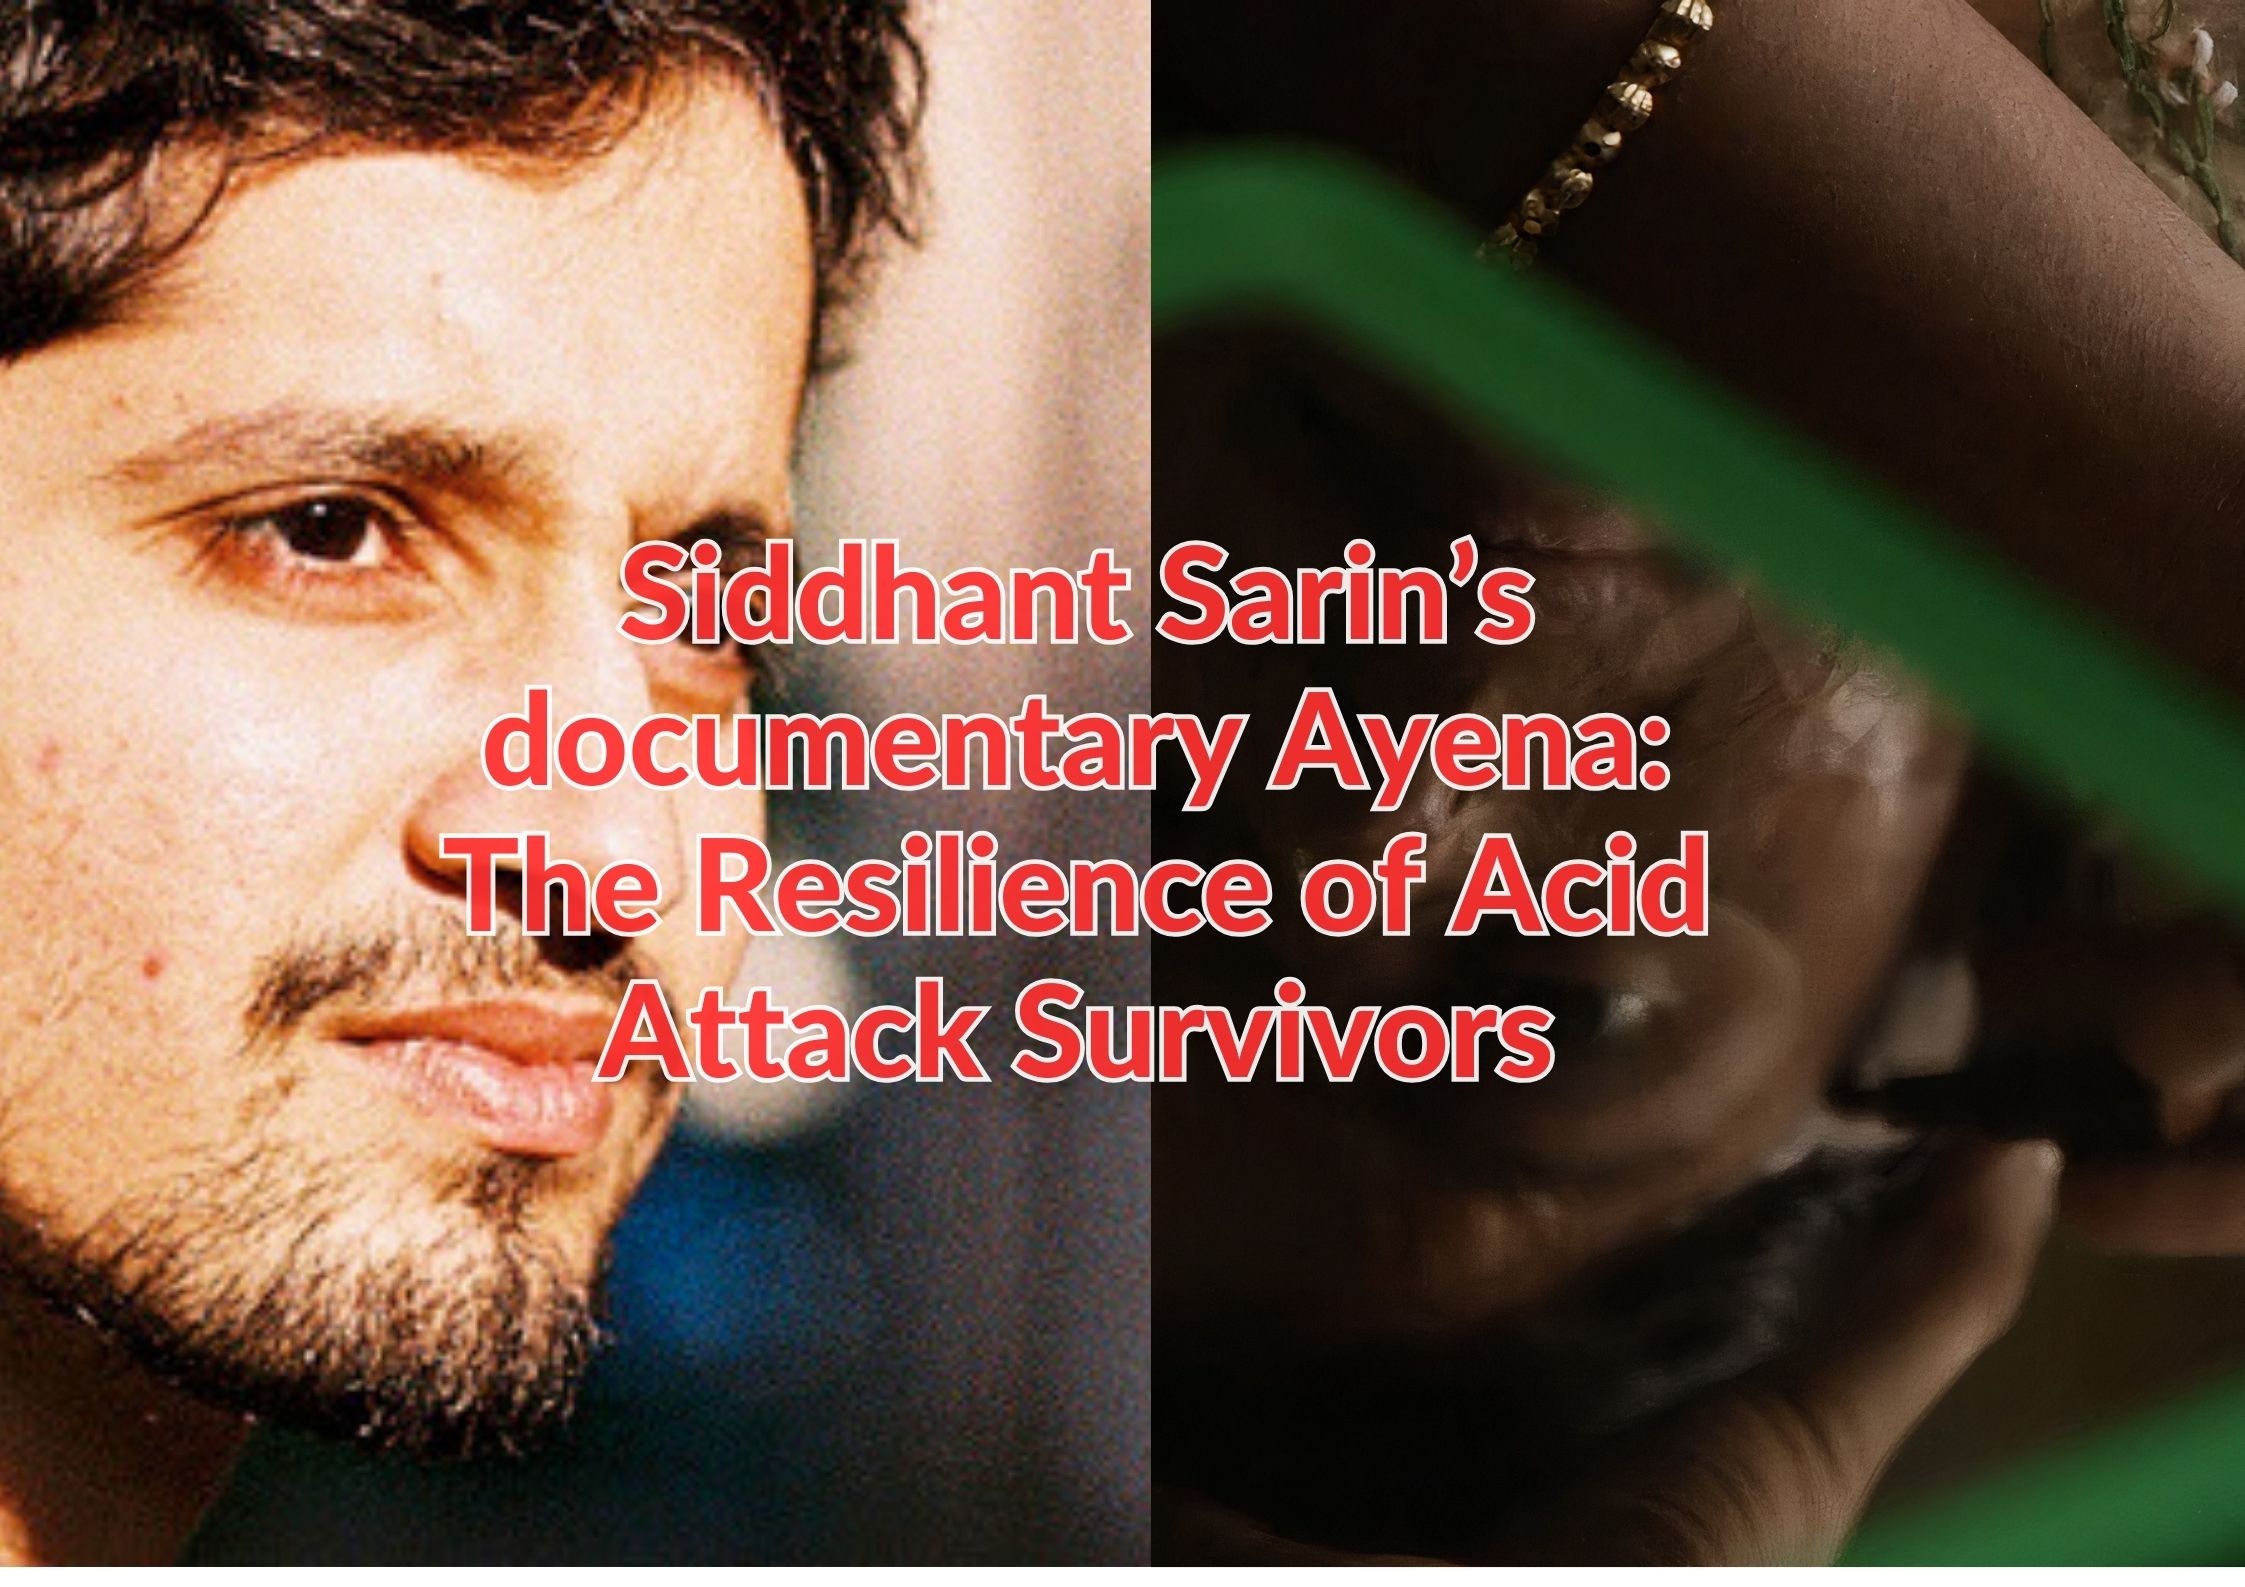 Siddhant Sarin’s documentary Ayena: The Resilience of Acid Attack Survivors